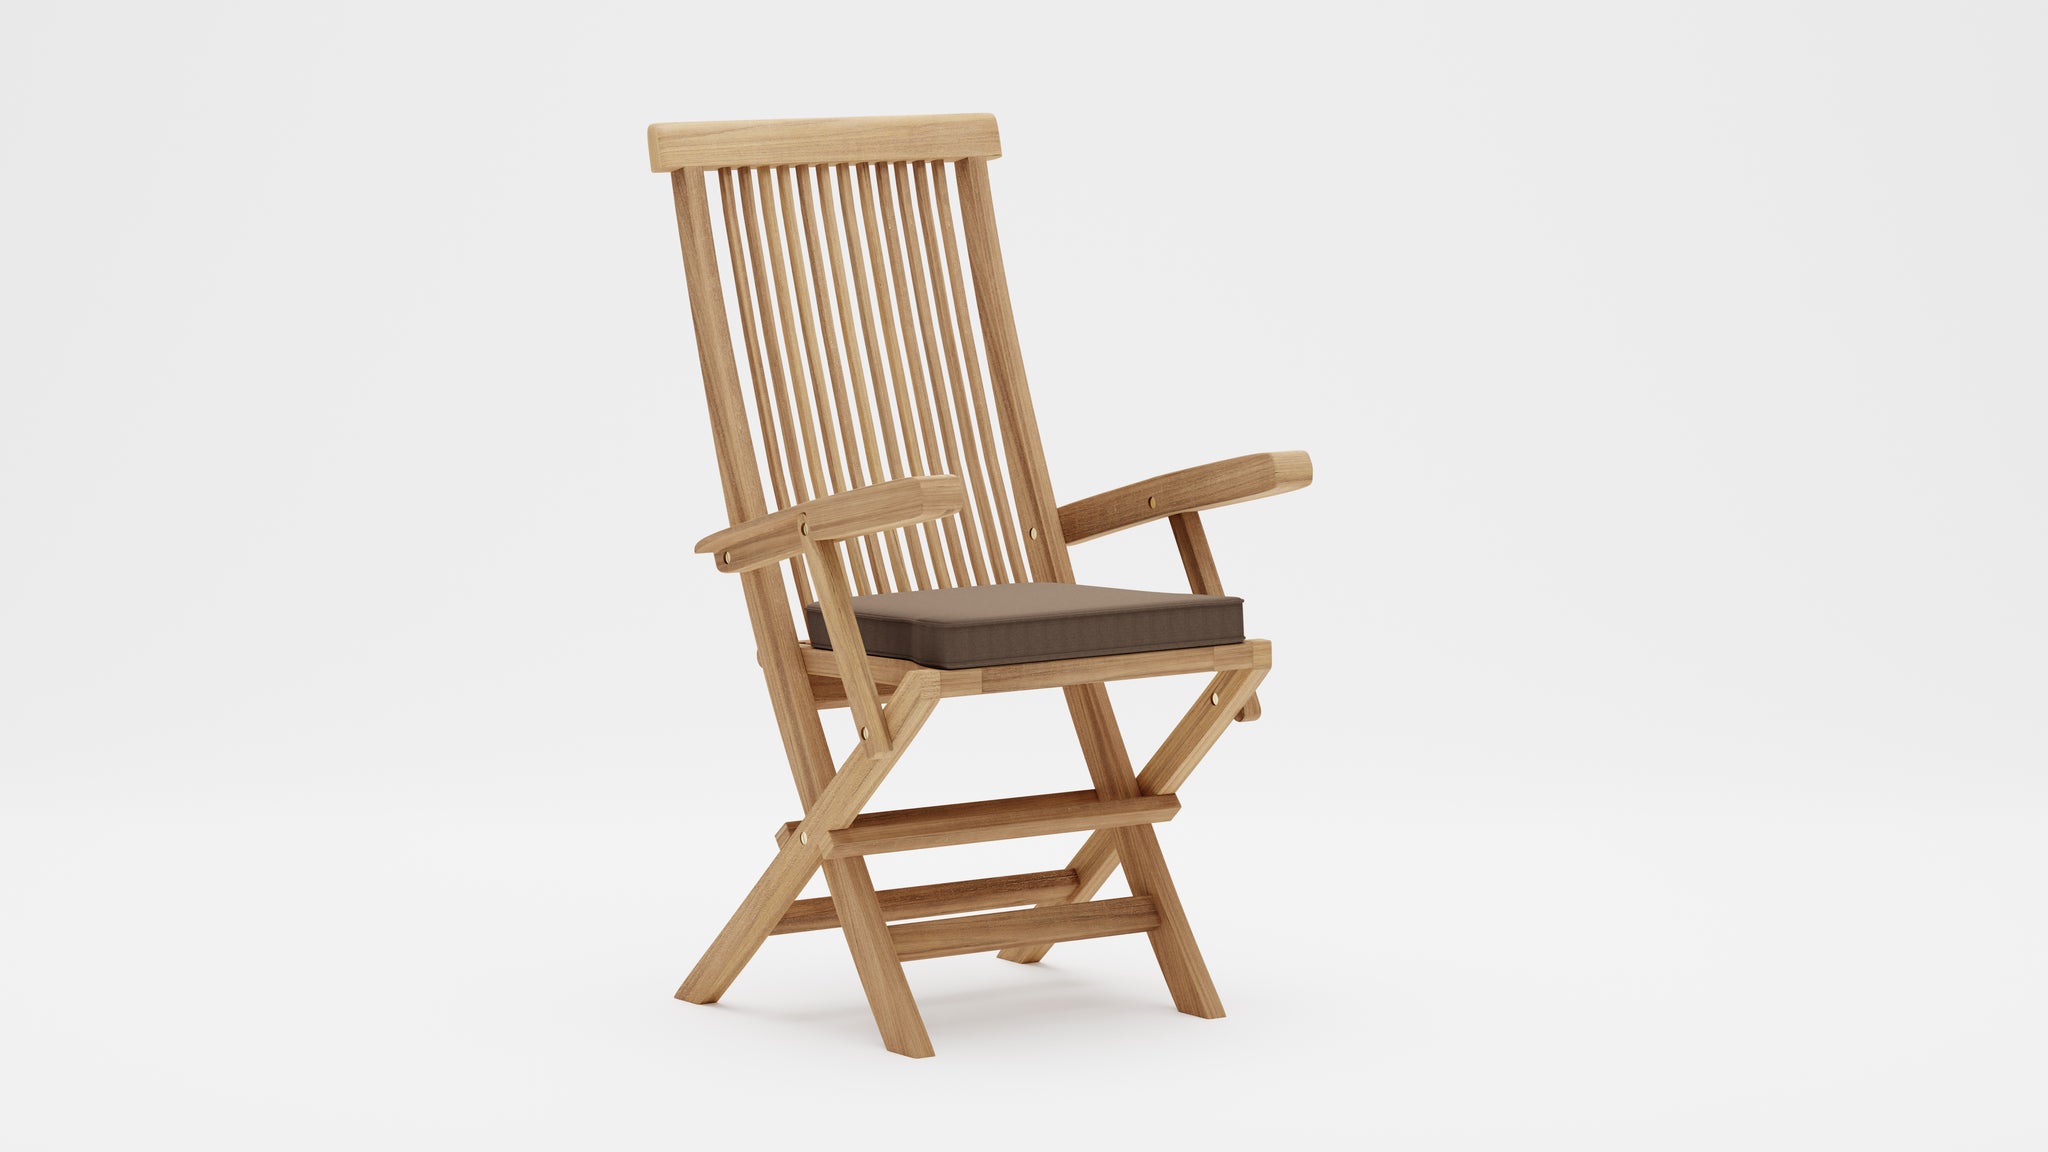 Lincoln Folding Carver Chair with Taupe Cushion